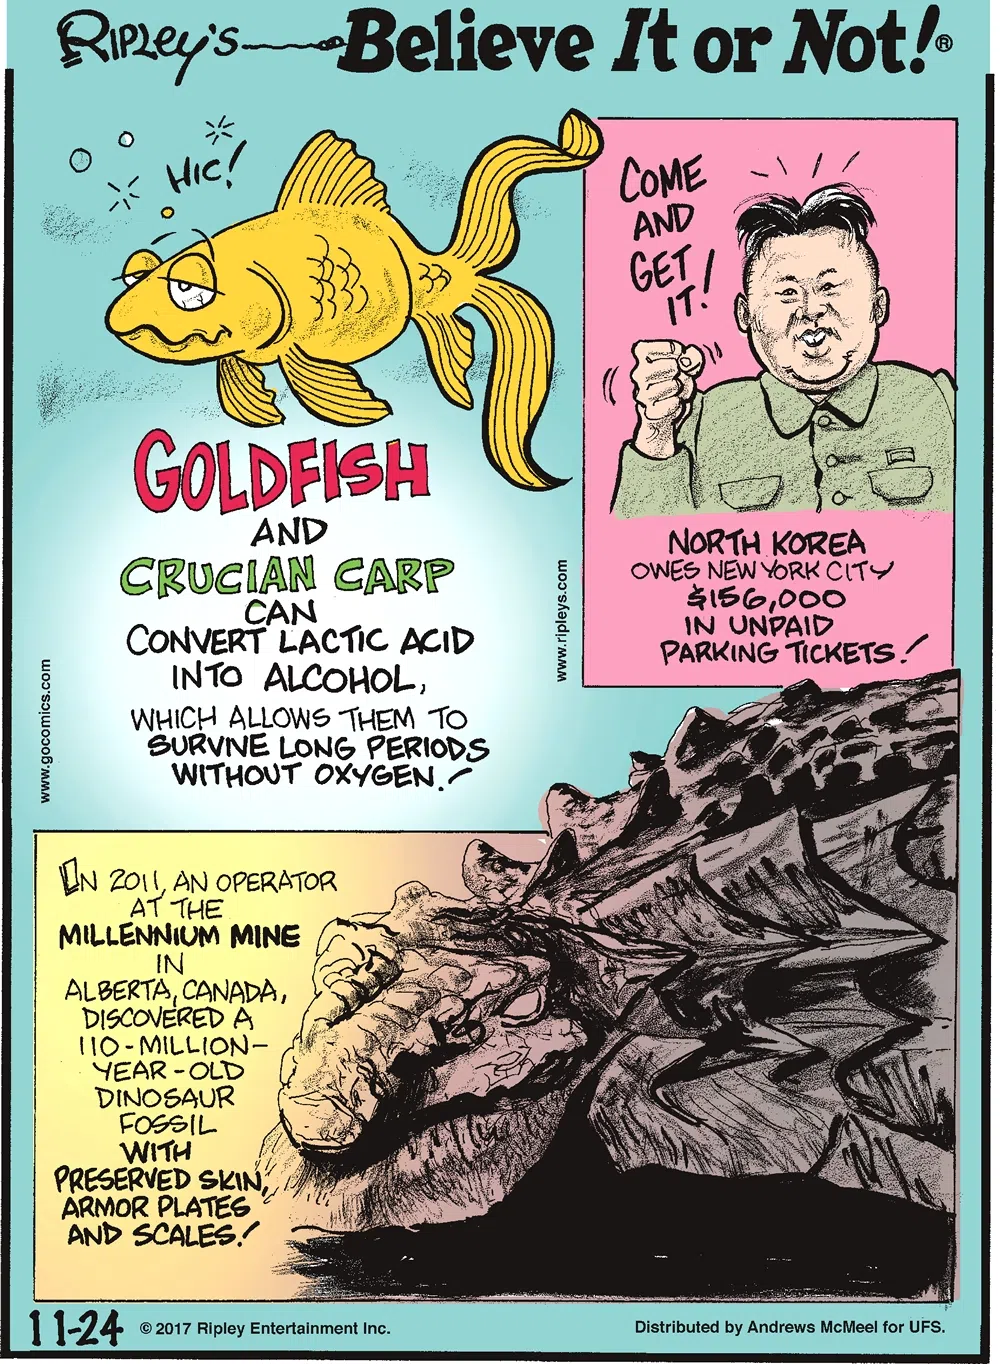 Goldfish and crucian carp can convert lactic acid into alcohol, which allows them to survive long periods without oxygen!-------------------- North Korea owes New York City $156,000 in unpaid parking tickets!-------------------- In 2011, an operator at the Millennium Mine in Alberta, Canada, discovered a 110-million-year-old dinosaur fossil with preserved skin, armor plates and scales!